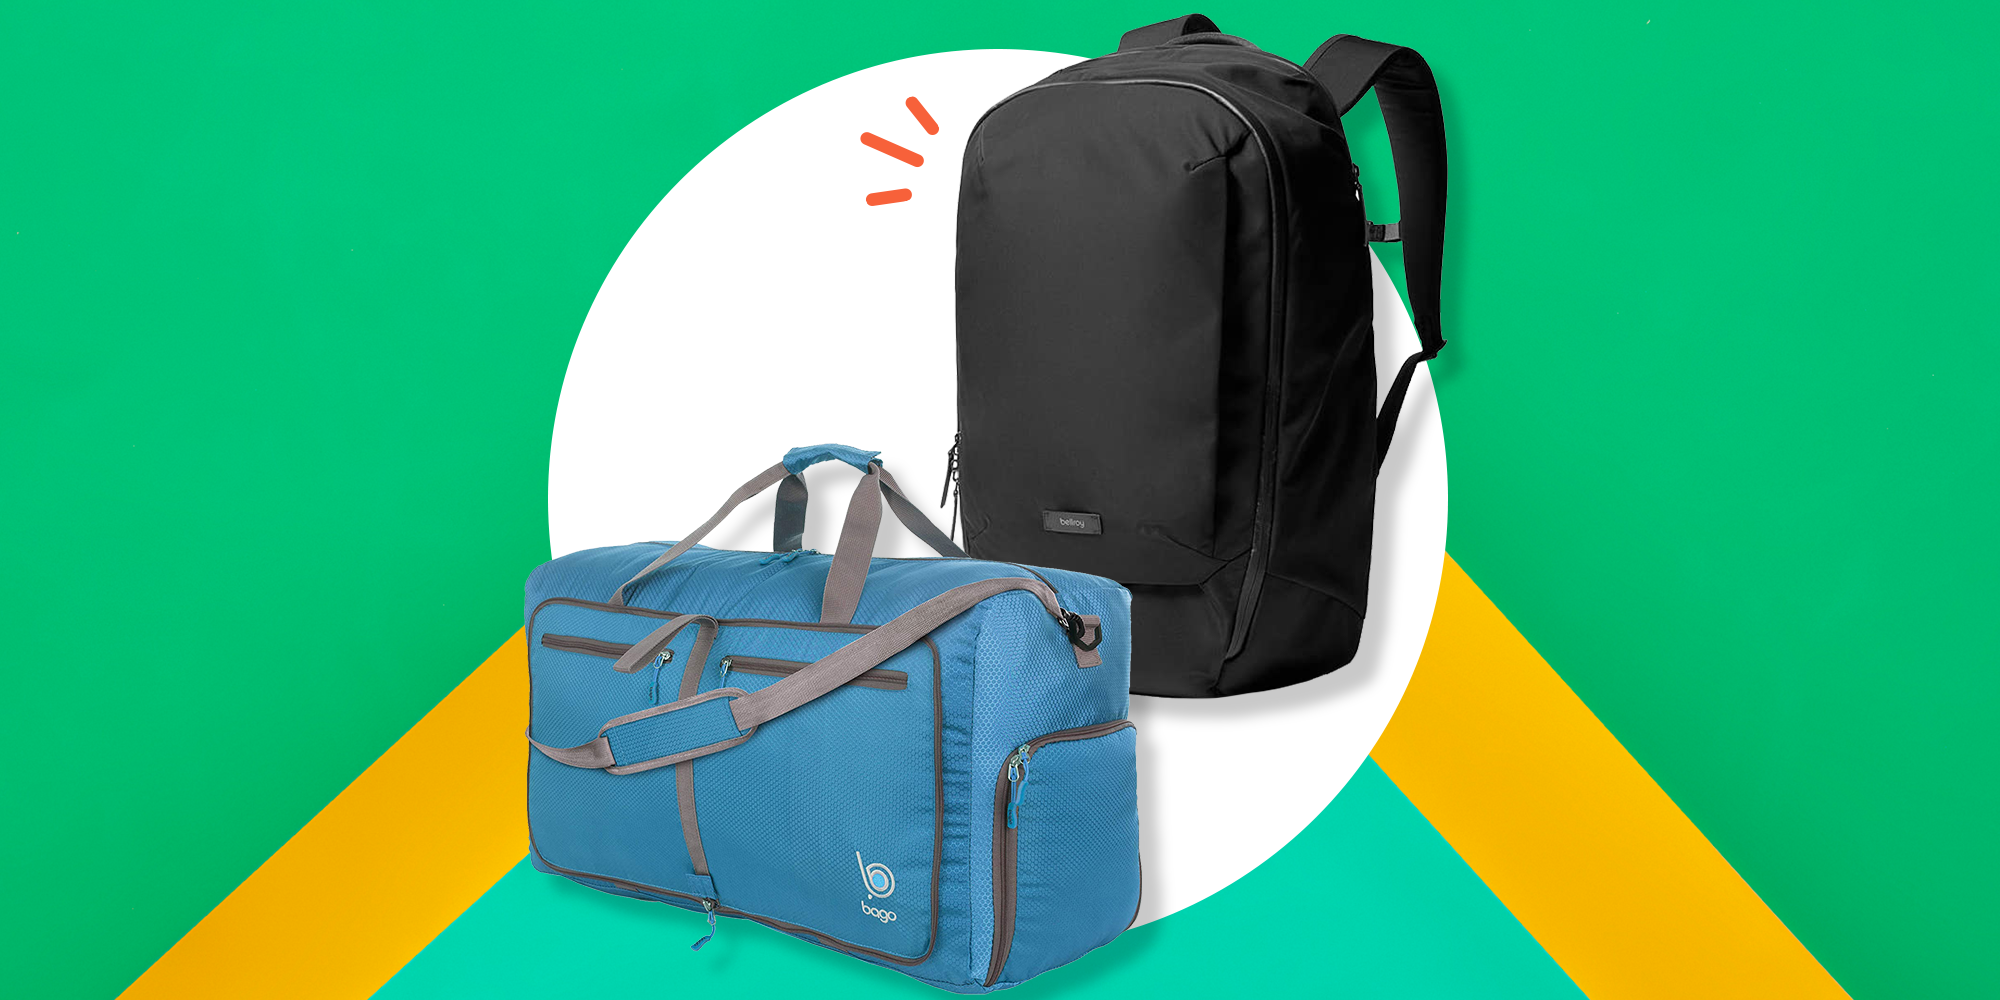 Small Travel Bags  Buy Small Travel Bags Online Starting at Just 999   Meesho